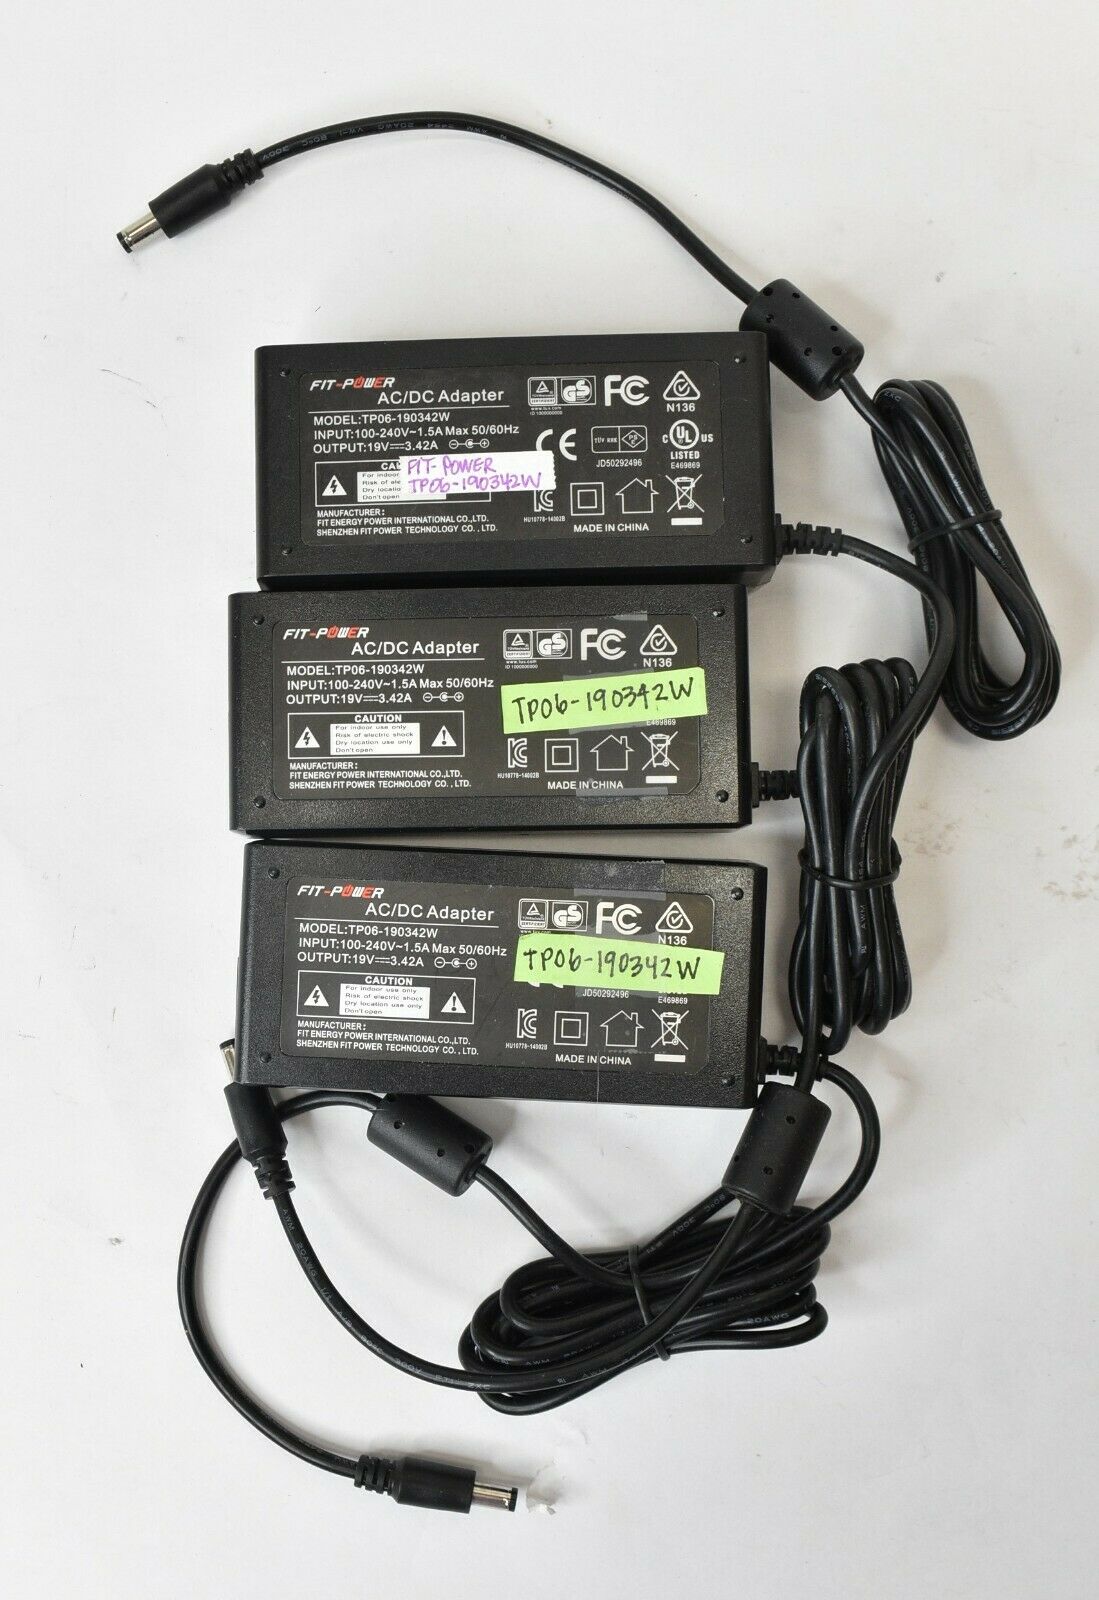 *Brand NEW*Lot of 3 Fit Energy Power TP06-190342W 19V 3.42A AC/DC Power Supply Adapter